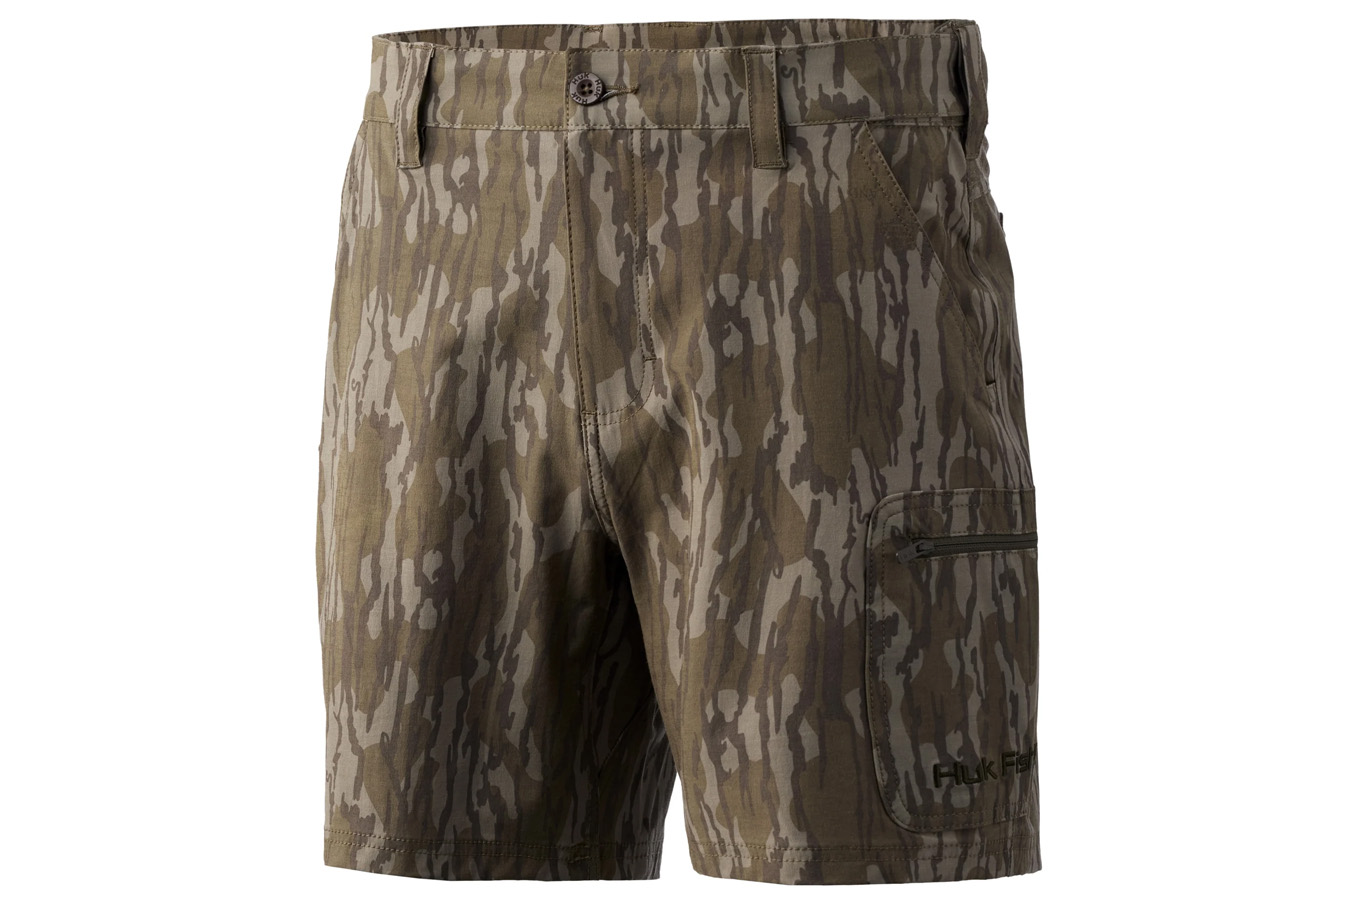 Huk Next Level 7 in Short - Mossy Oak Bottomland for Sale, Online Clothing  Store